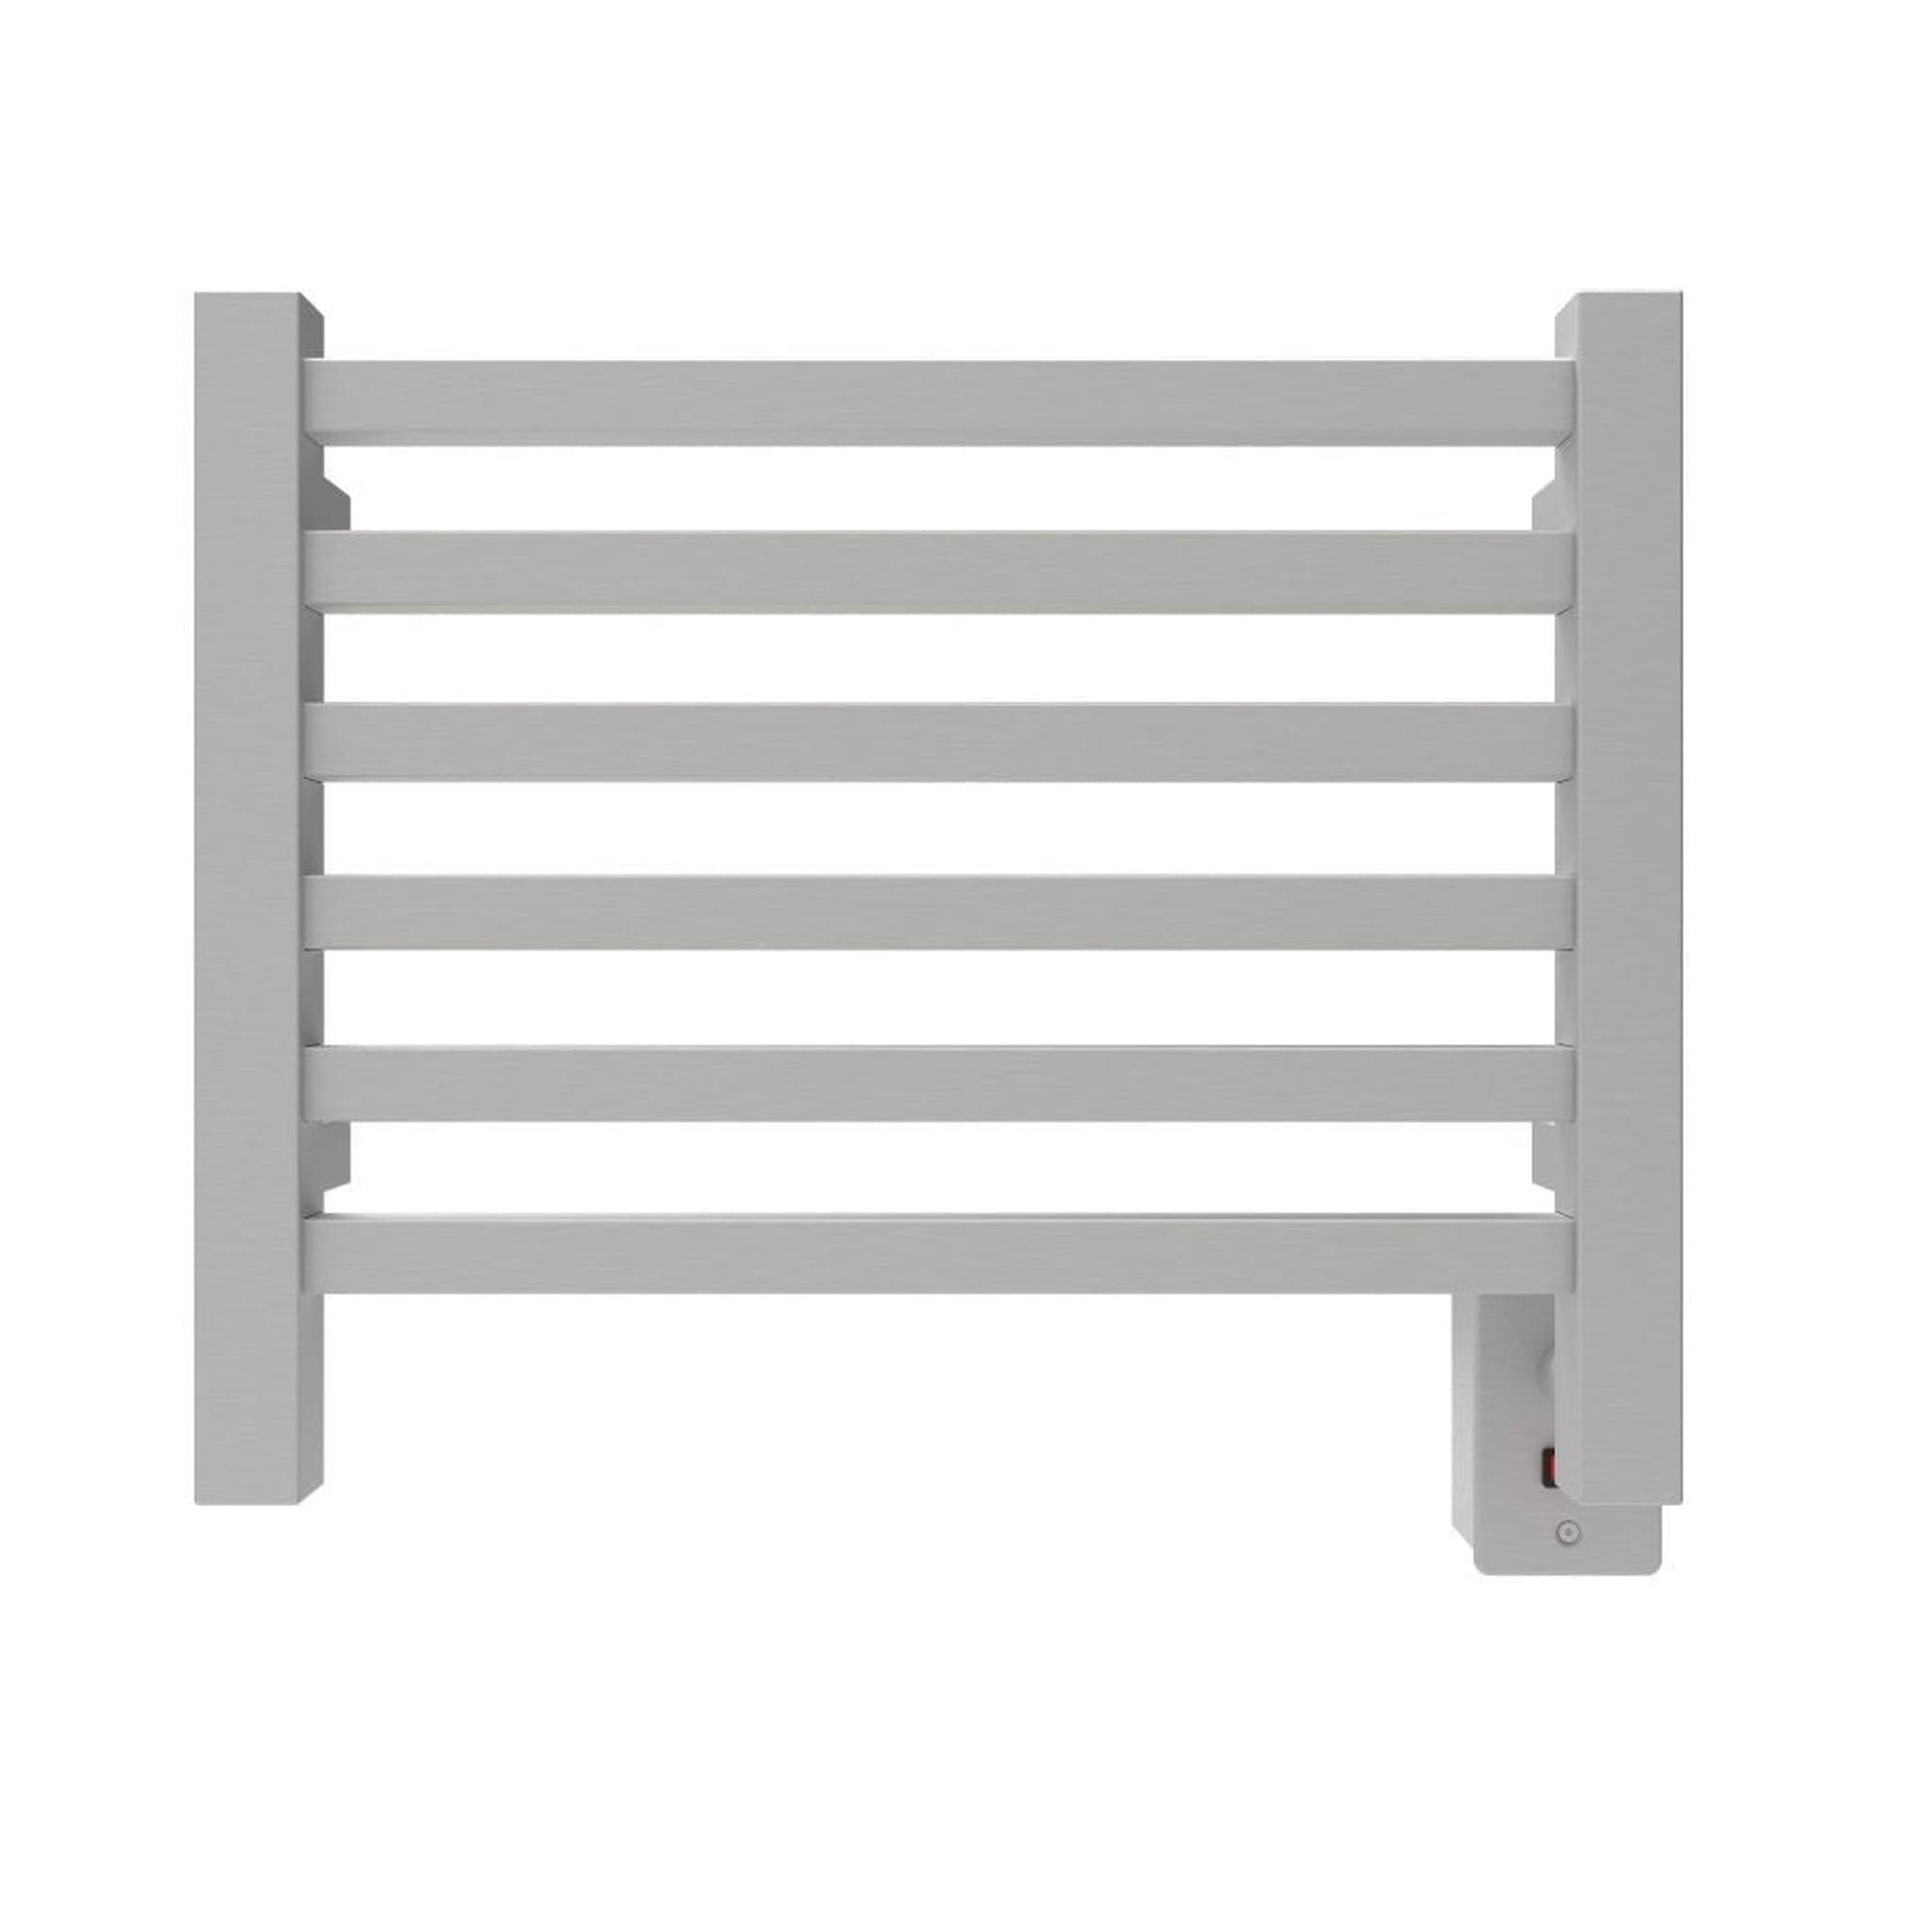 Amba Quadro 20" x 16" 6-Bar Brushed Stainless Steel Finish Hardwired Towel Warmer With Push Button On/Off Switch